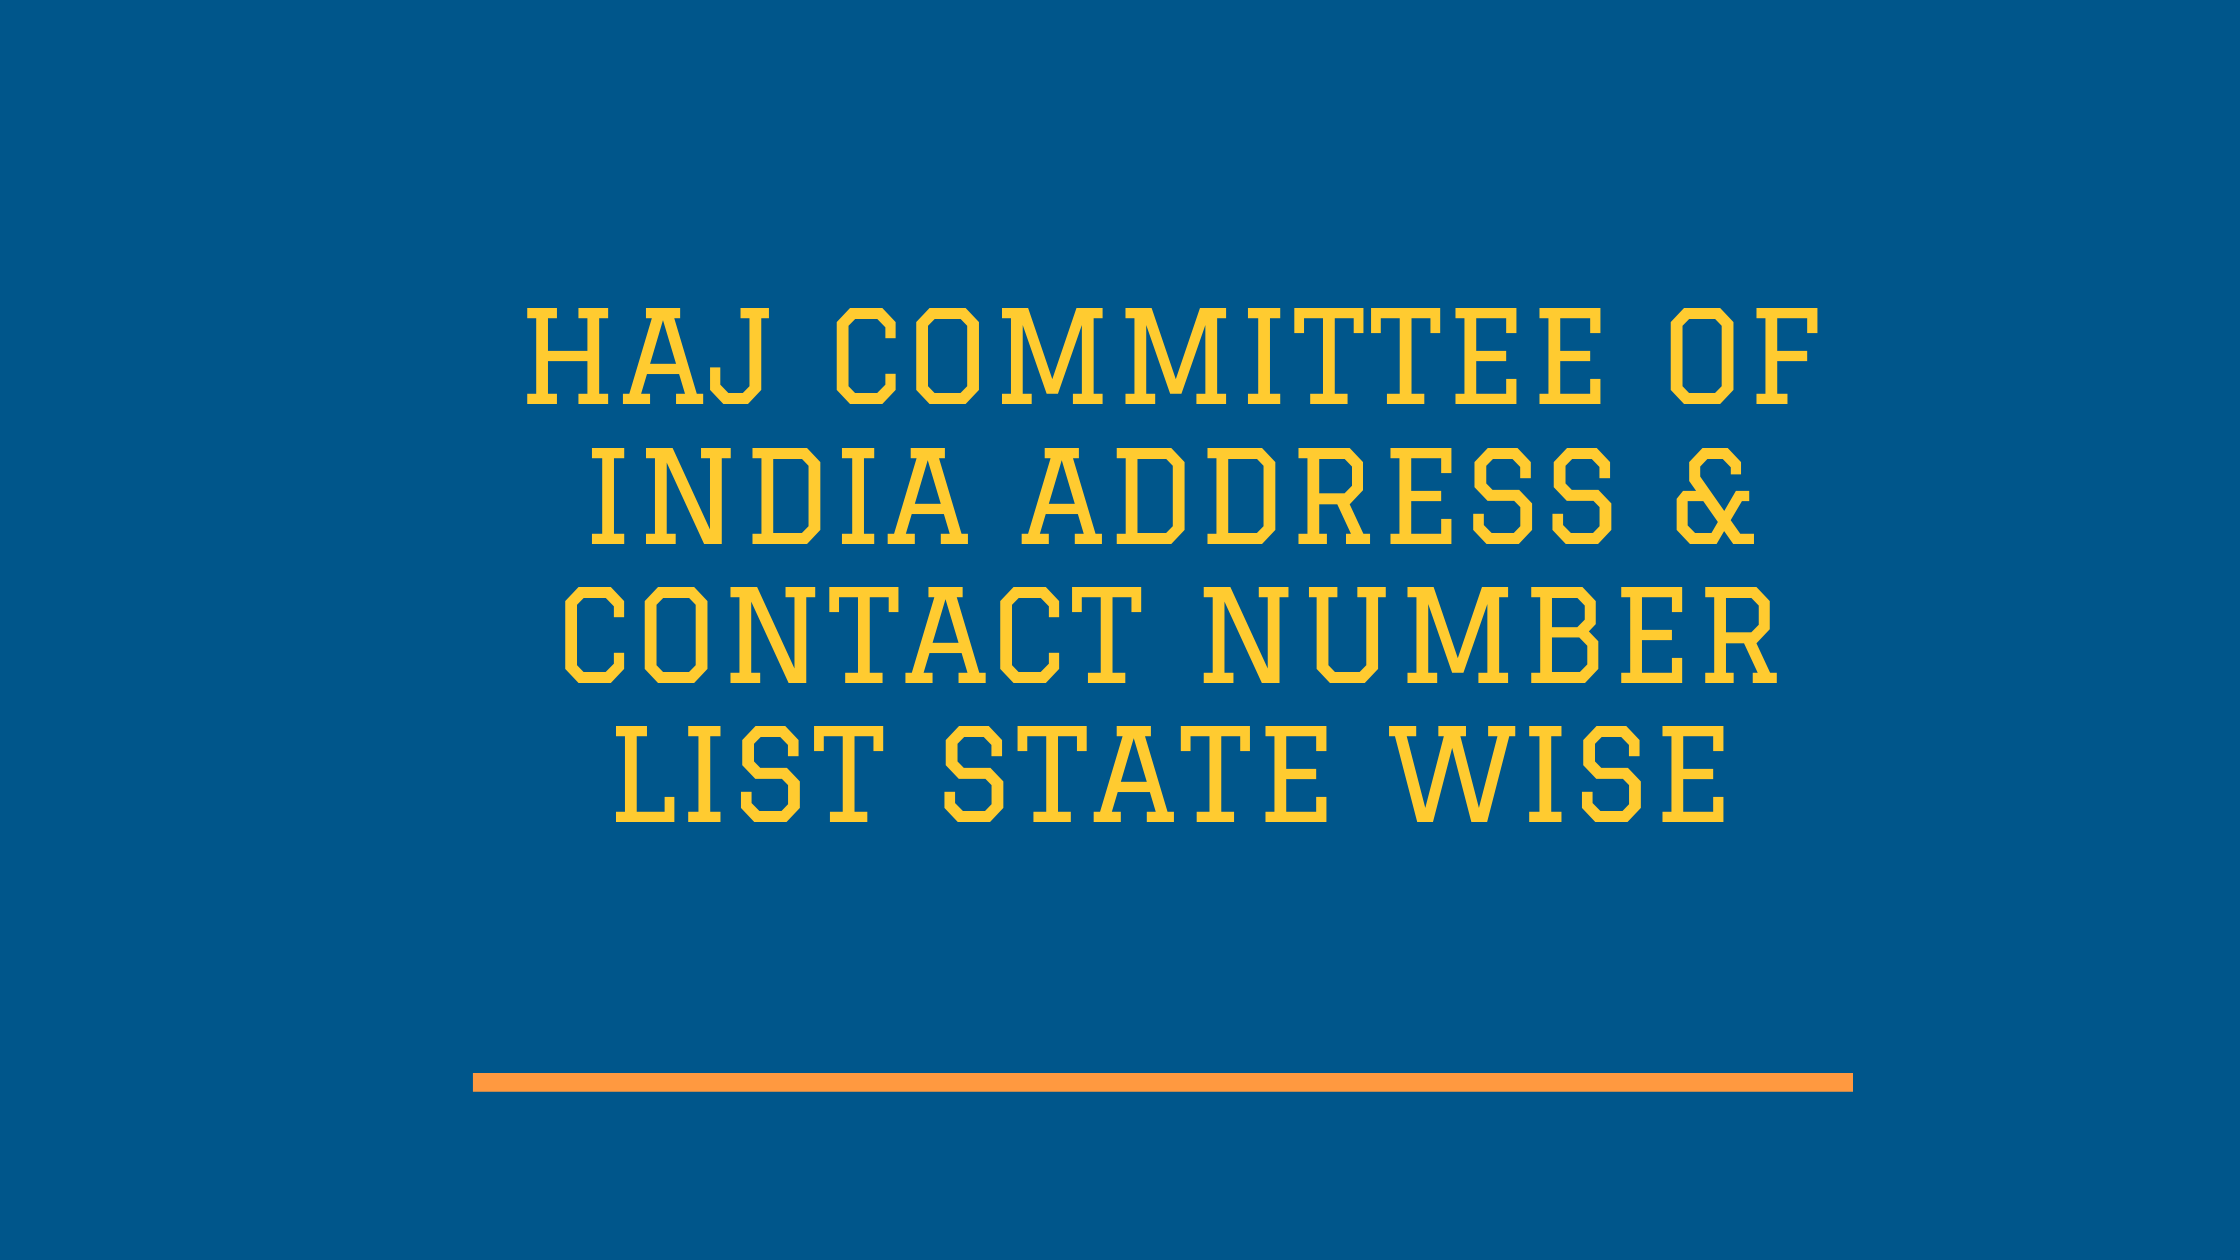 Haj Committee of India address & Contact Number List State Wise | India haj committee | Hajj umrah company in india